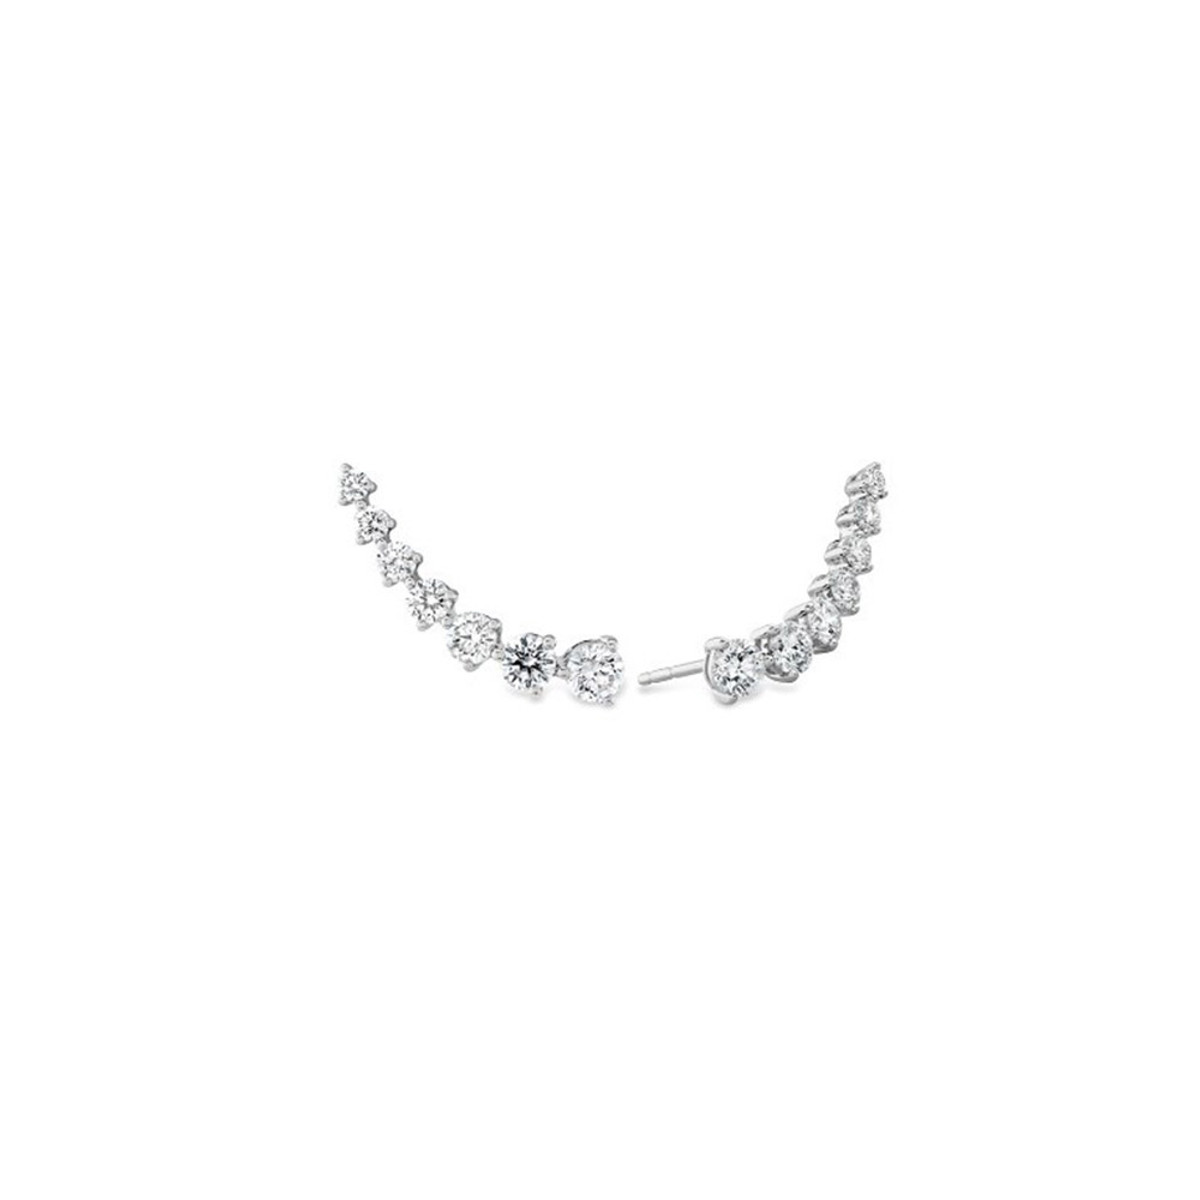 Hyde Park Collection 18K White Gold Diamond Earrings-47885 Product Image